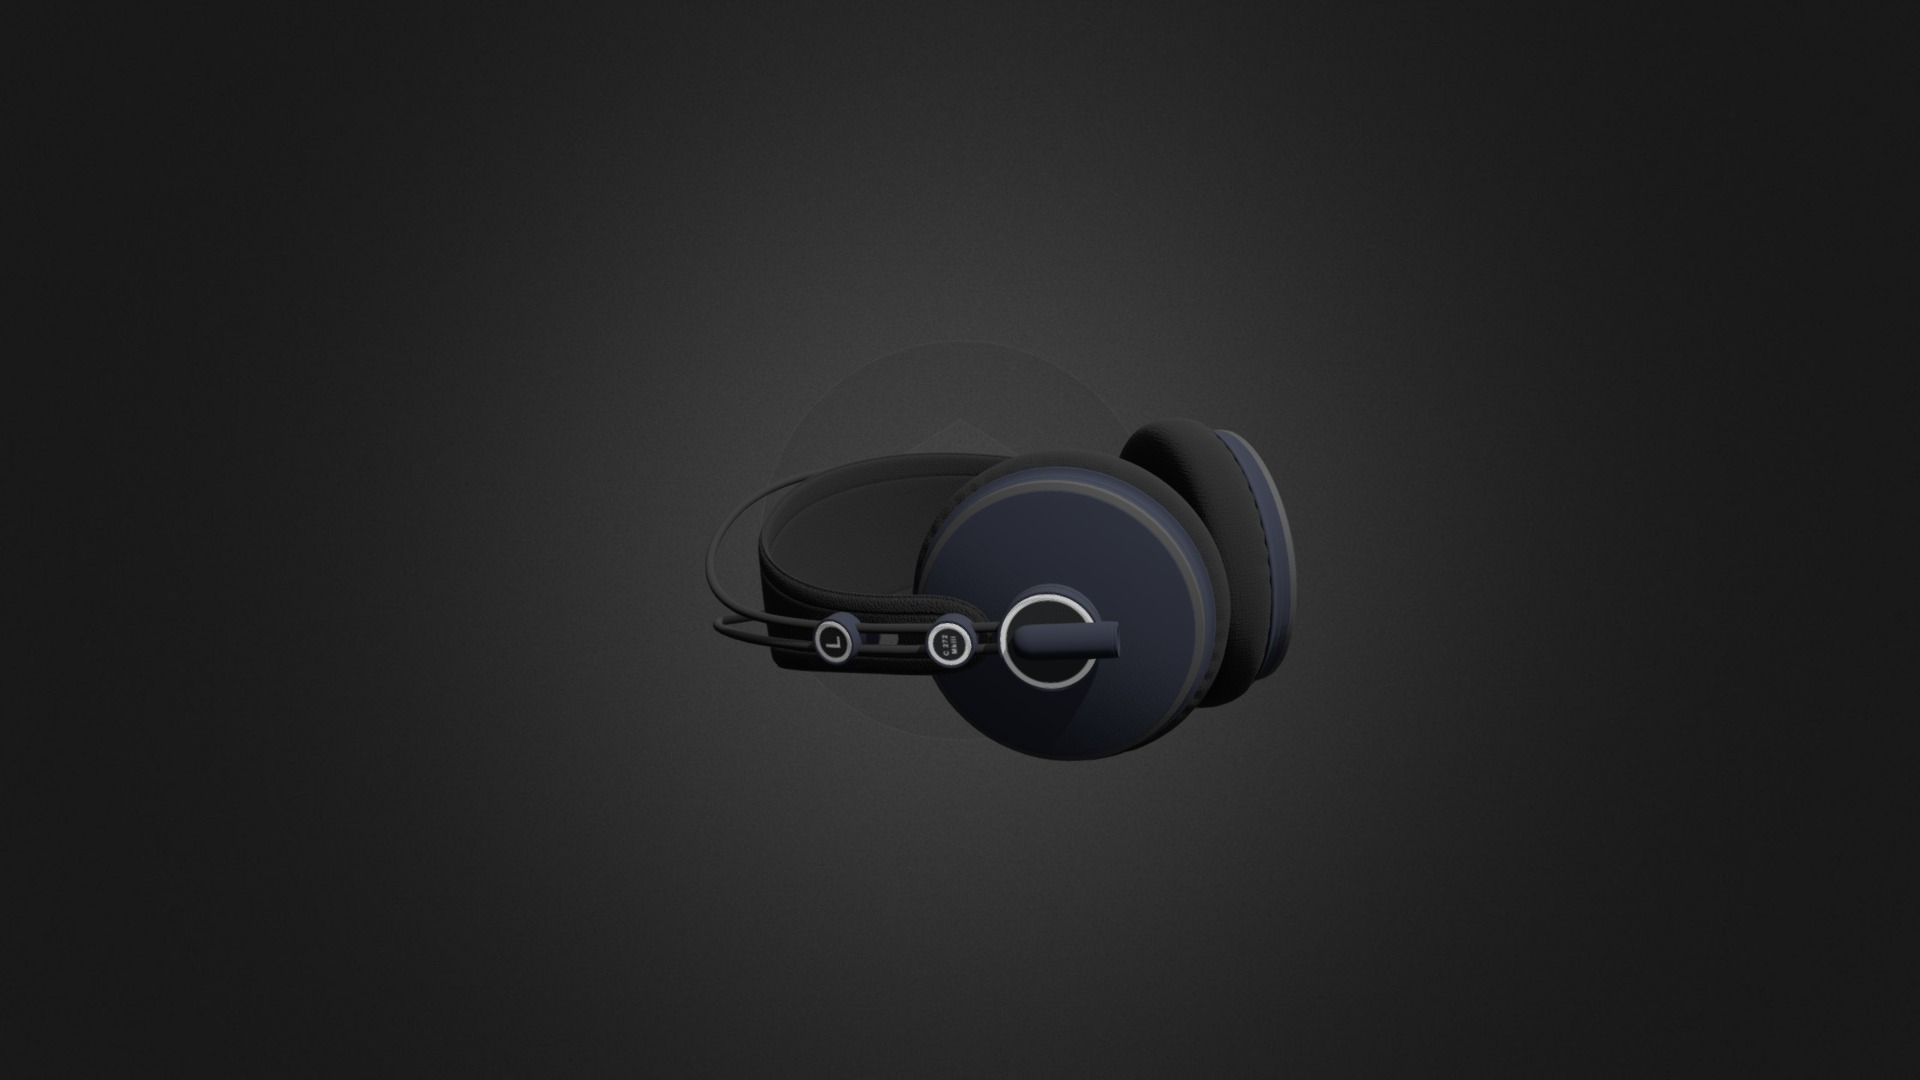 3D model Headphones 1 - This is a 3D model of the Headphones 1. The 3D model is about a silver car headphone.